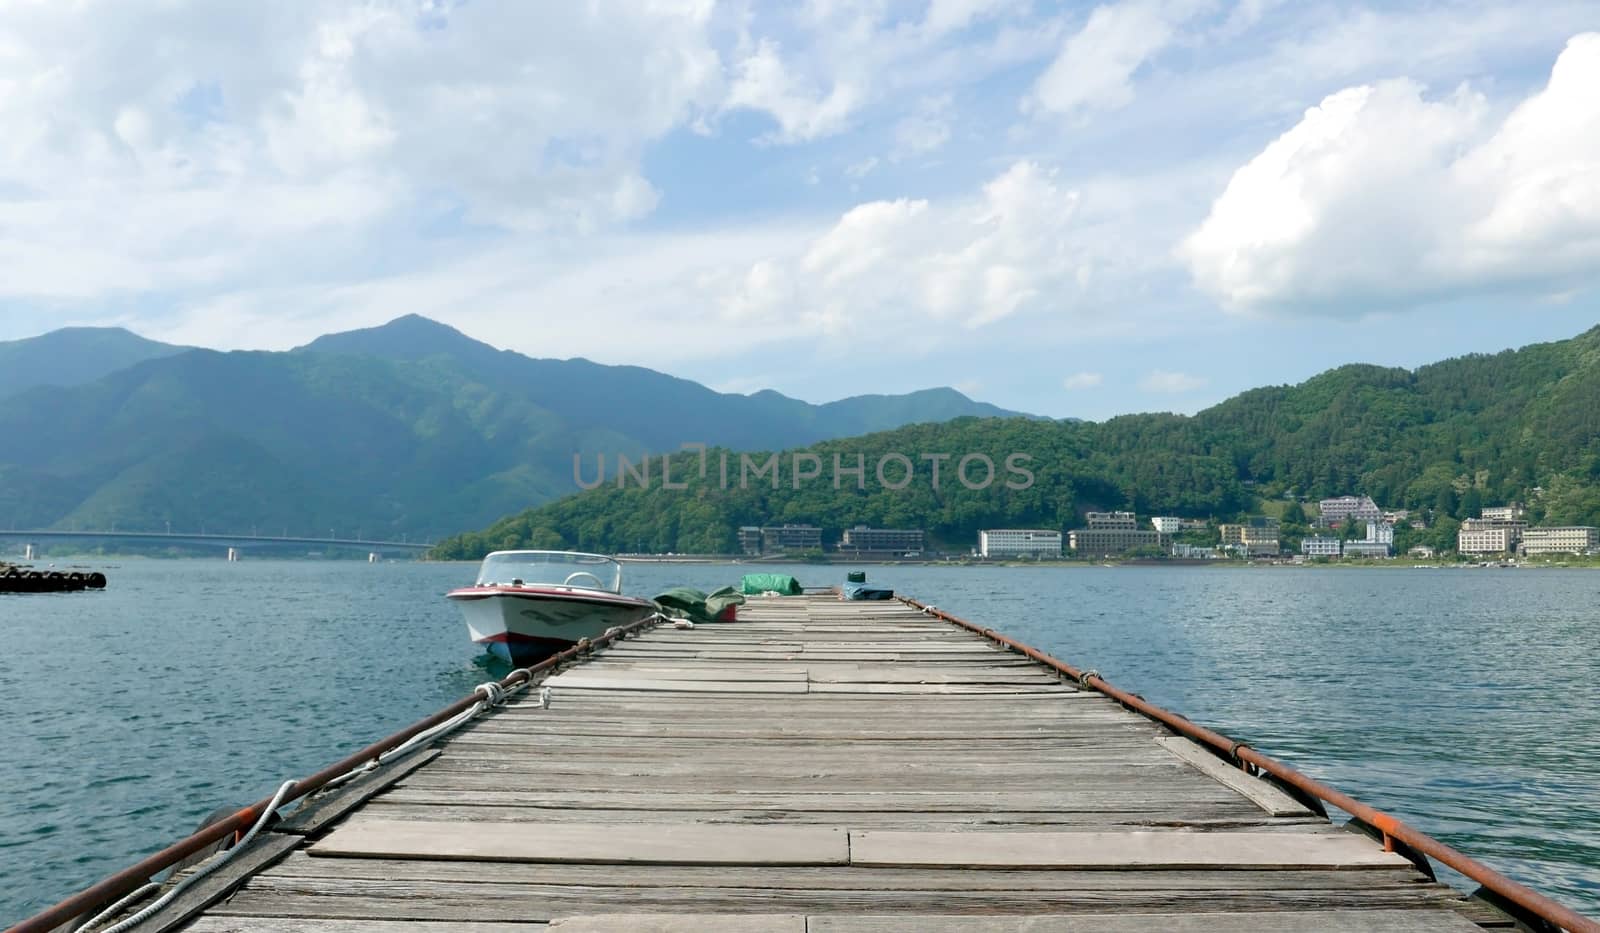 The mountain, recreational wooden boats, clouds, lake, blue sky and sun in Hong Kong